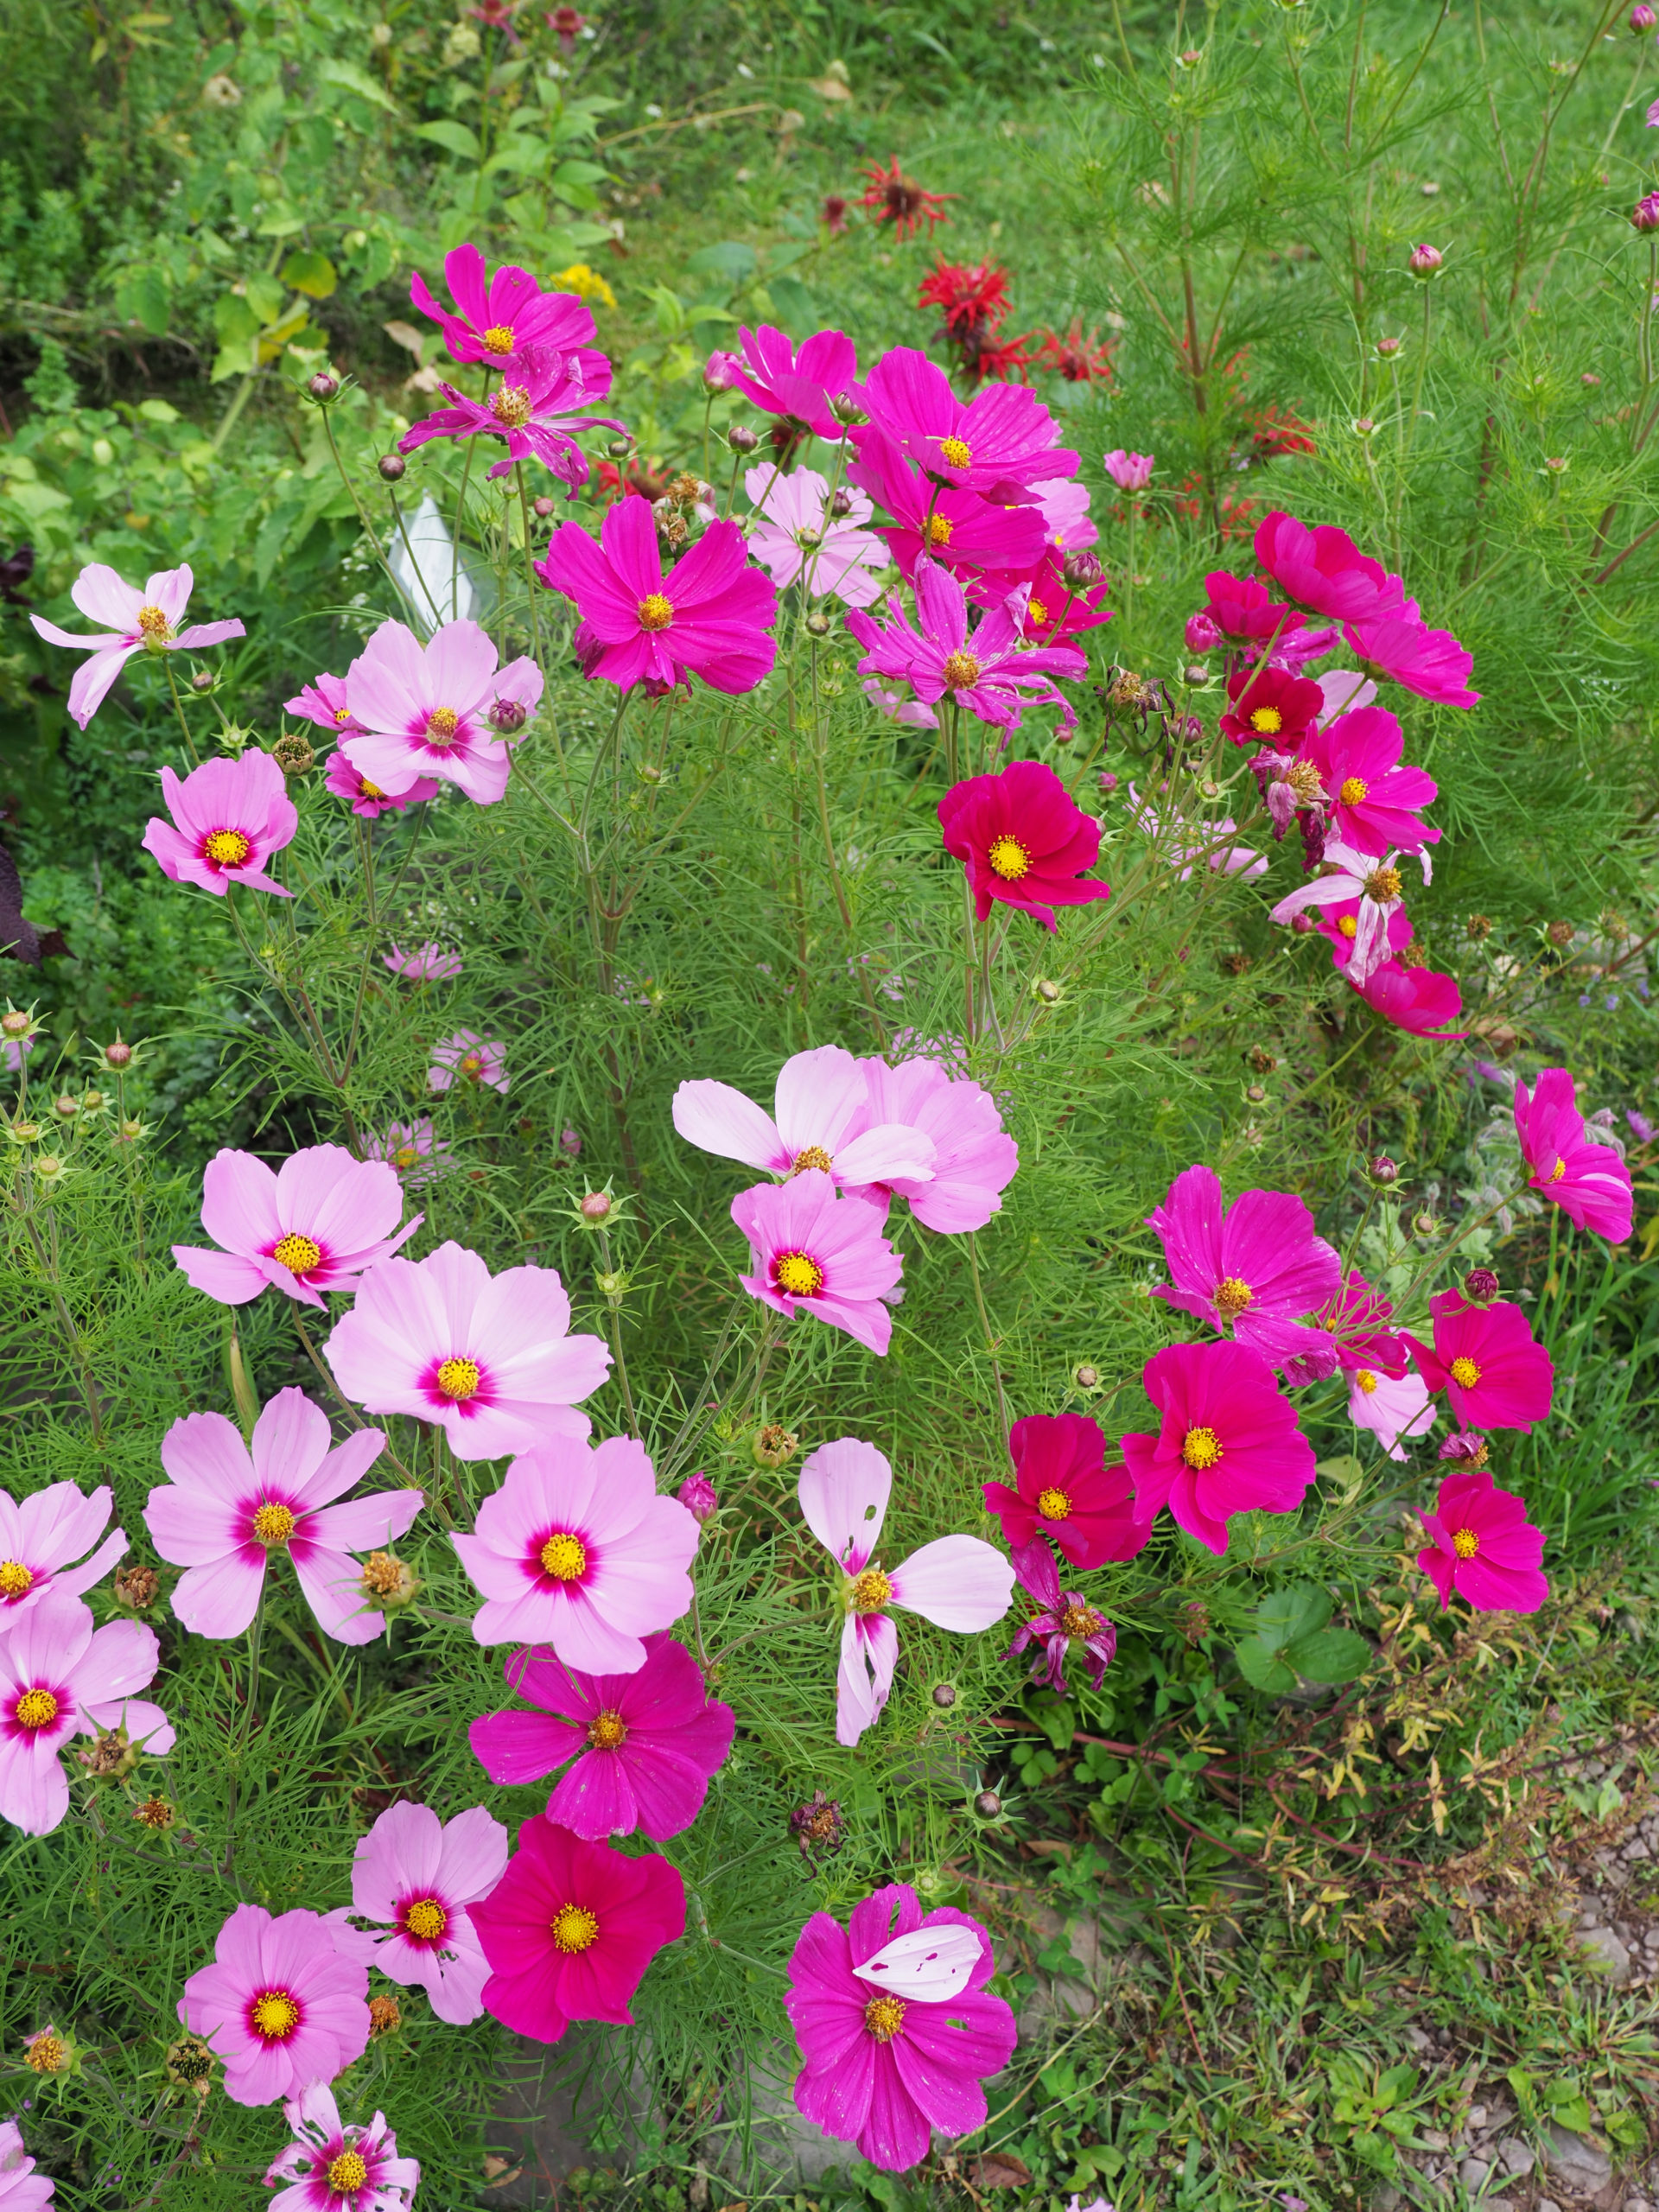 Cosmos are also grown easily from seed and are available in colors from white to pink, cherry, red, and bi-colors. The stems are wiry, and the flowers last only a few days but are easily replaced with more always being produced until frost.